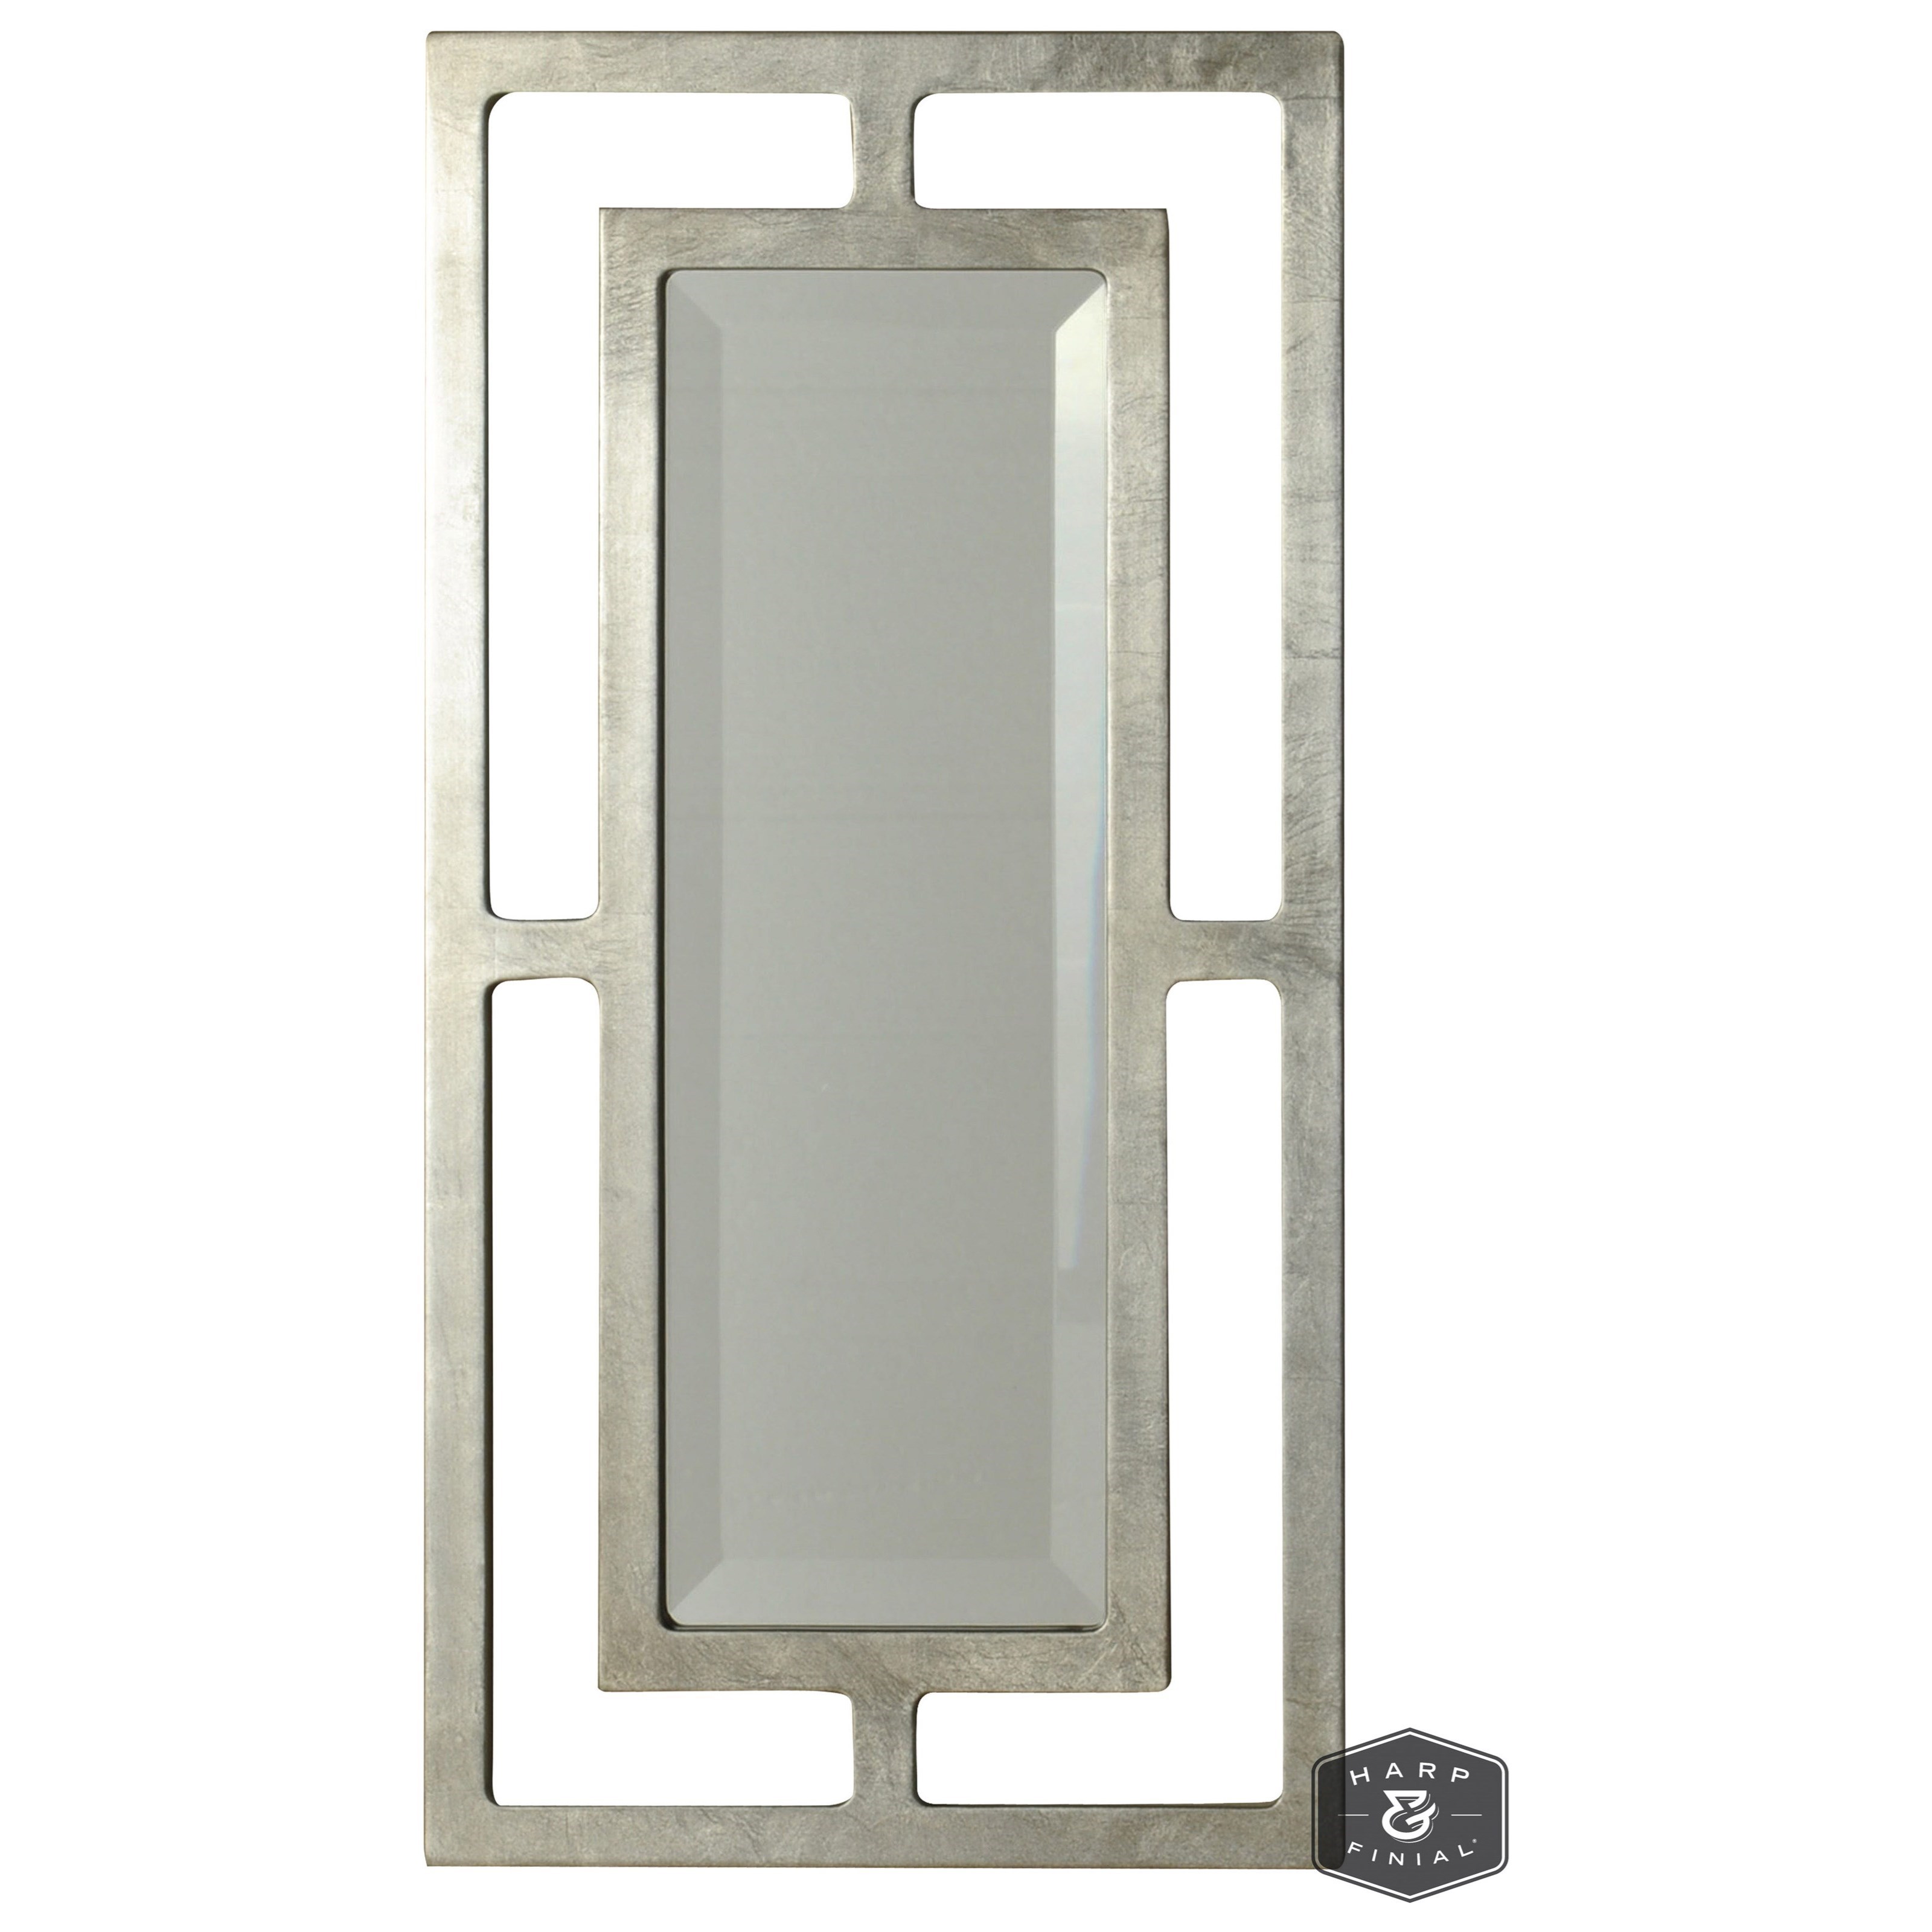 Double-Framed Beveled Mirror with Silver Finish